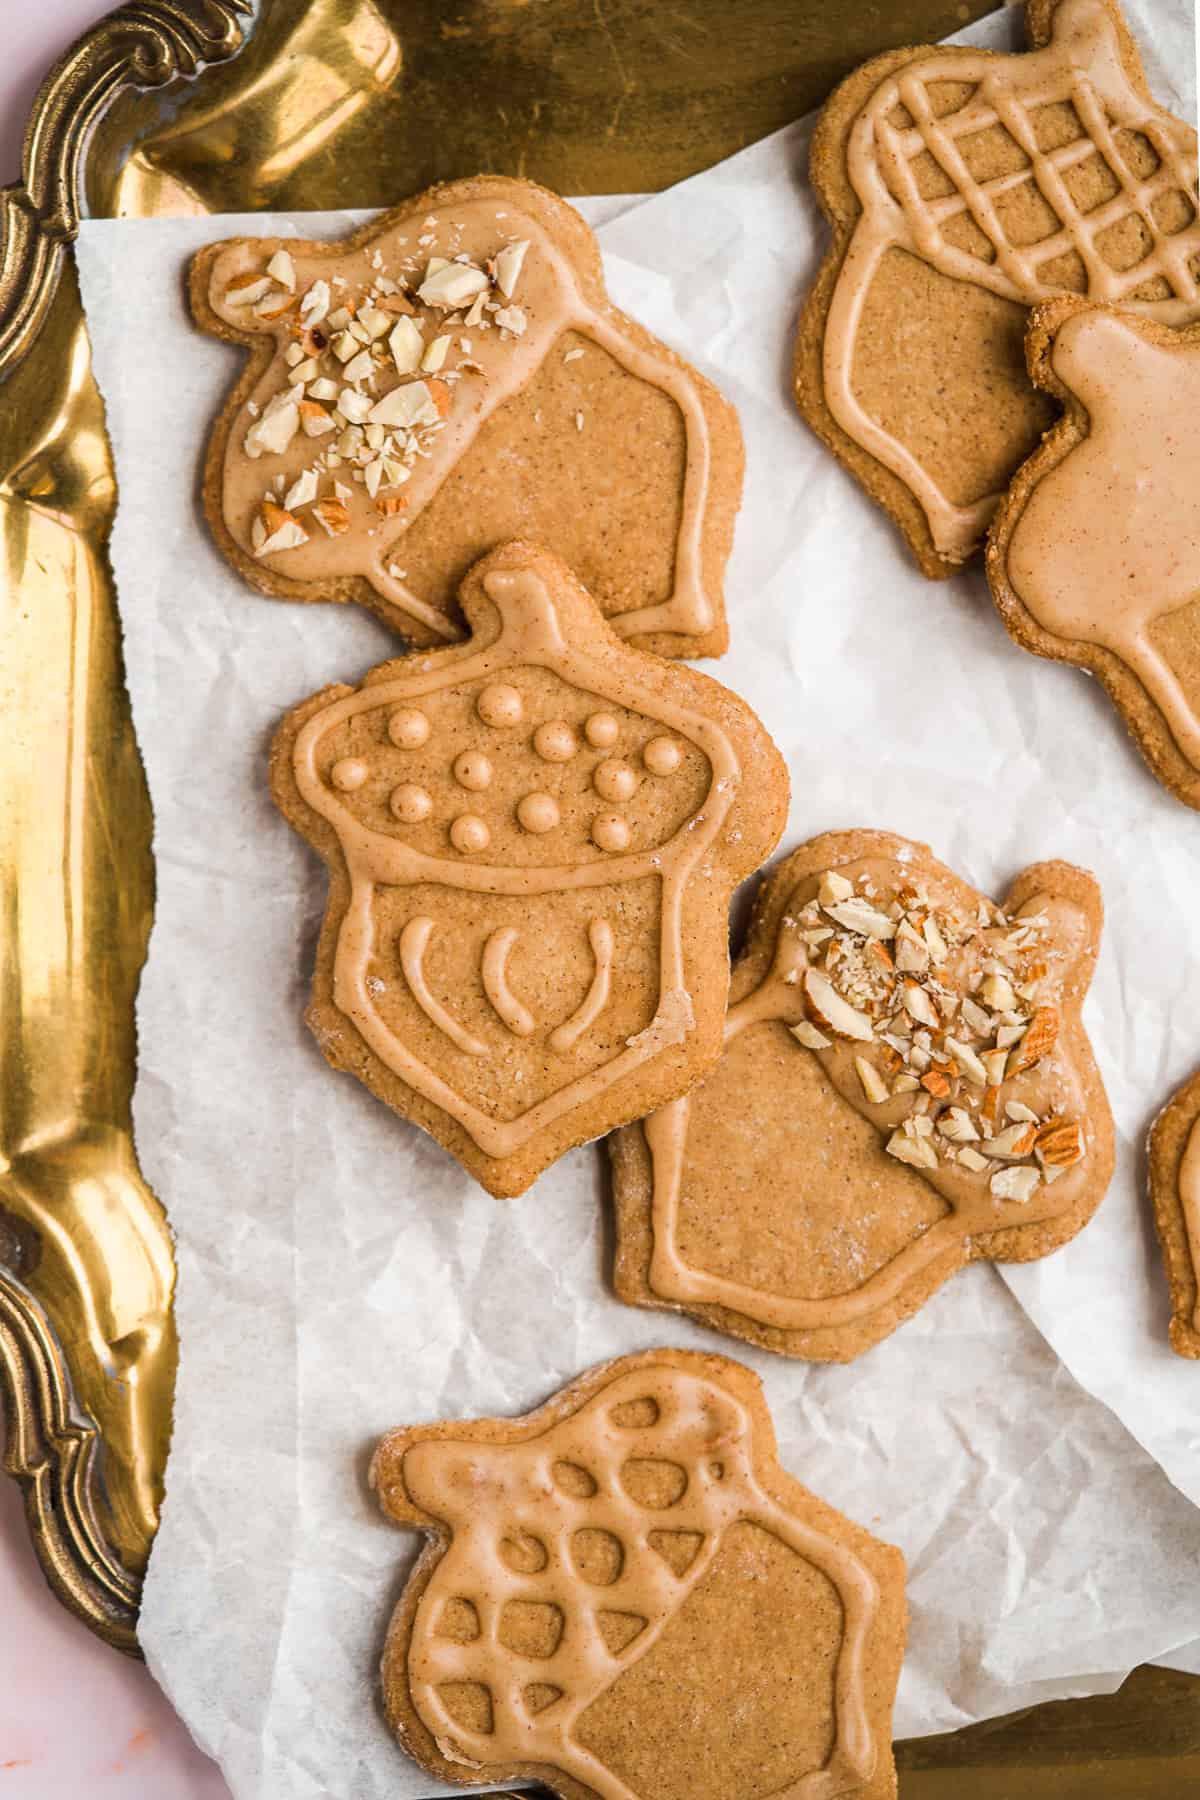 With hints of maple and nutty flavor, these almond flour peanut butter sugar cookies have all the warm and cozy feels in every bite. They're buttery soft and chewy with a classic cut-out sugar cookie texture. Each one is laced with a peanut butter infused royal icing that will truly rock your world.